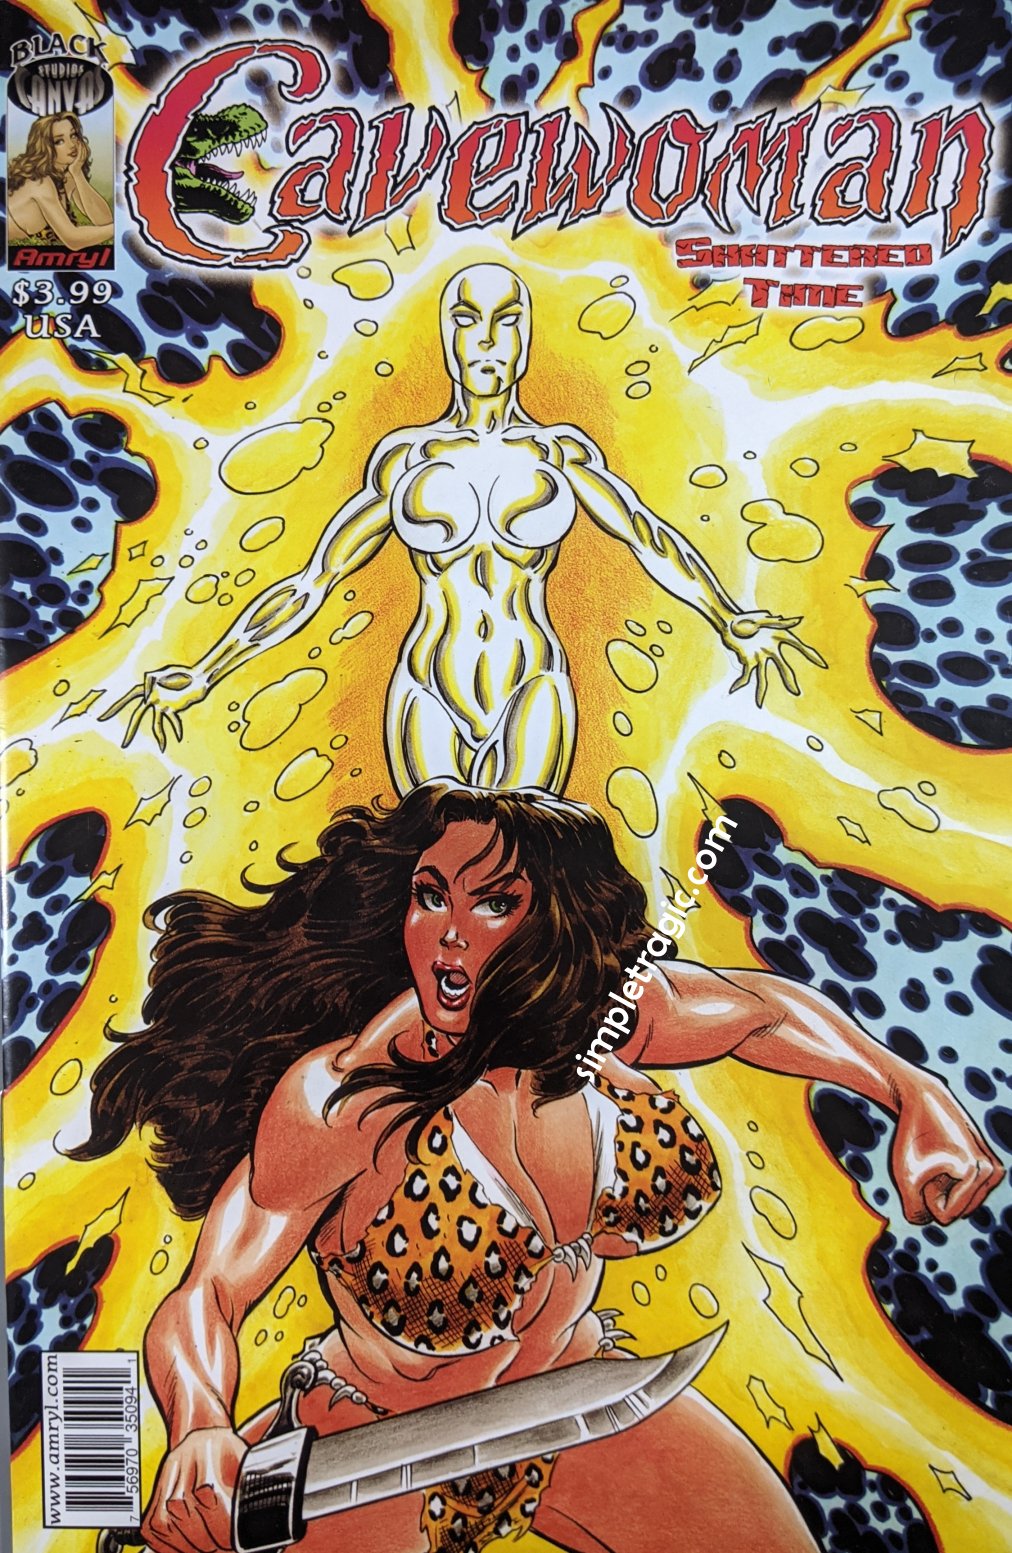 Cavewoman: Shattered Time #1 Comic Book Cover Art